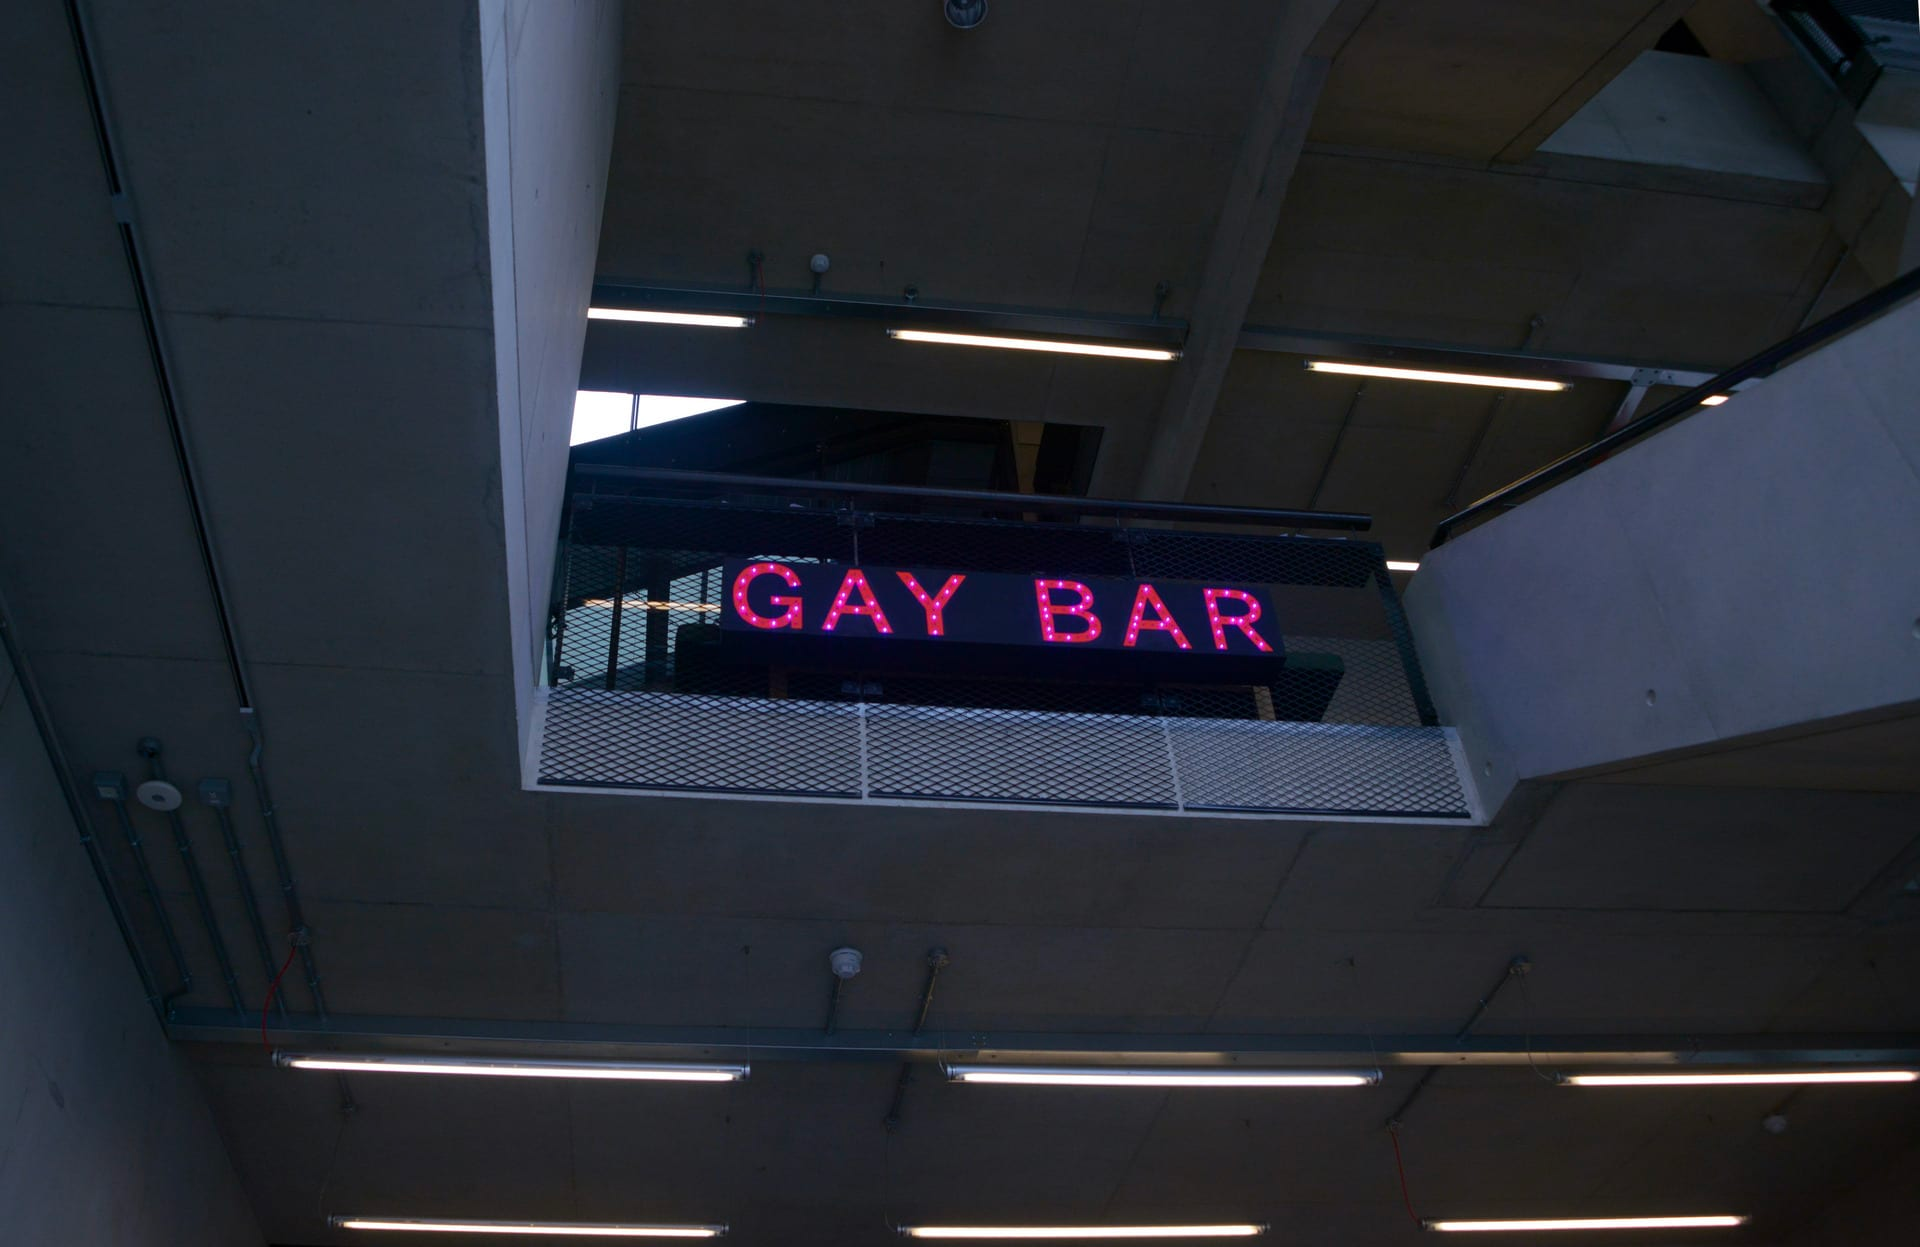 Photograph looking upwards to a black, interior balcony with pink illuminated letters spelling ‘Gay Bar’.